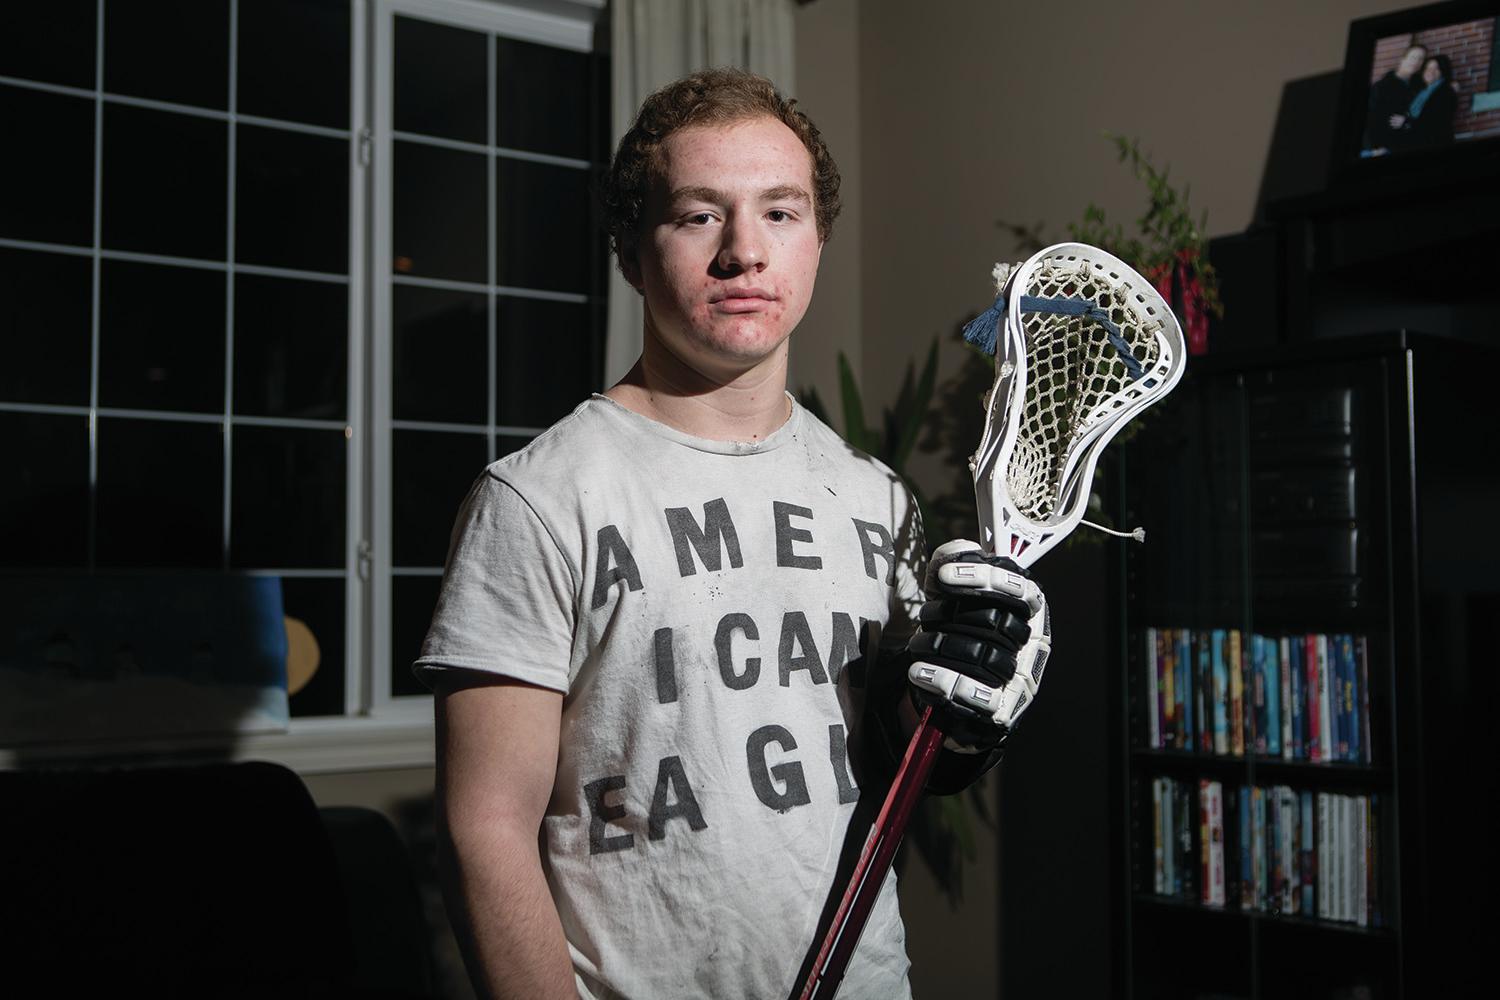 BIG DREAMS - Local lacrosse player Keaton Kennedy hopes to pursue a scholarship at an NCAA school.